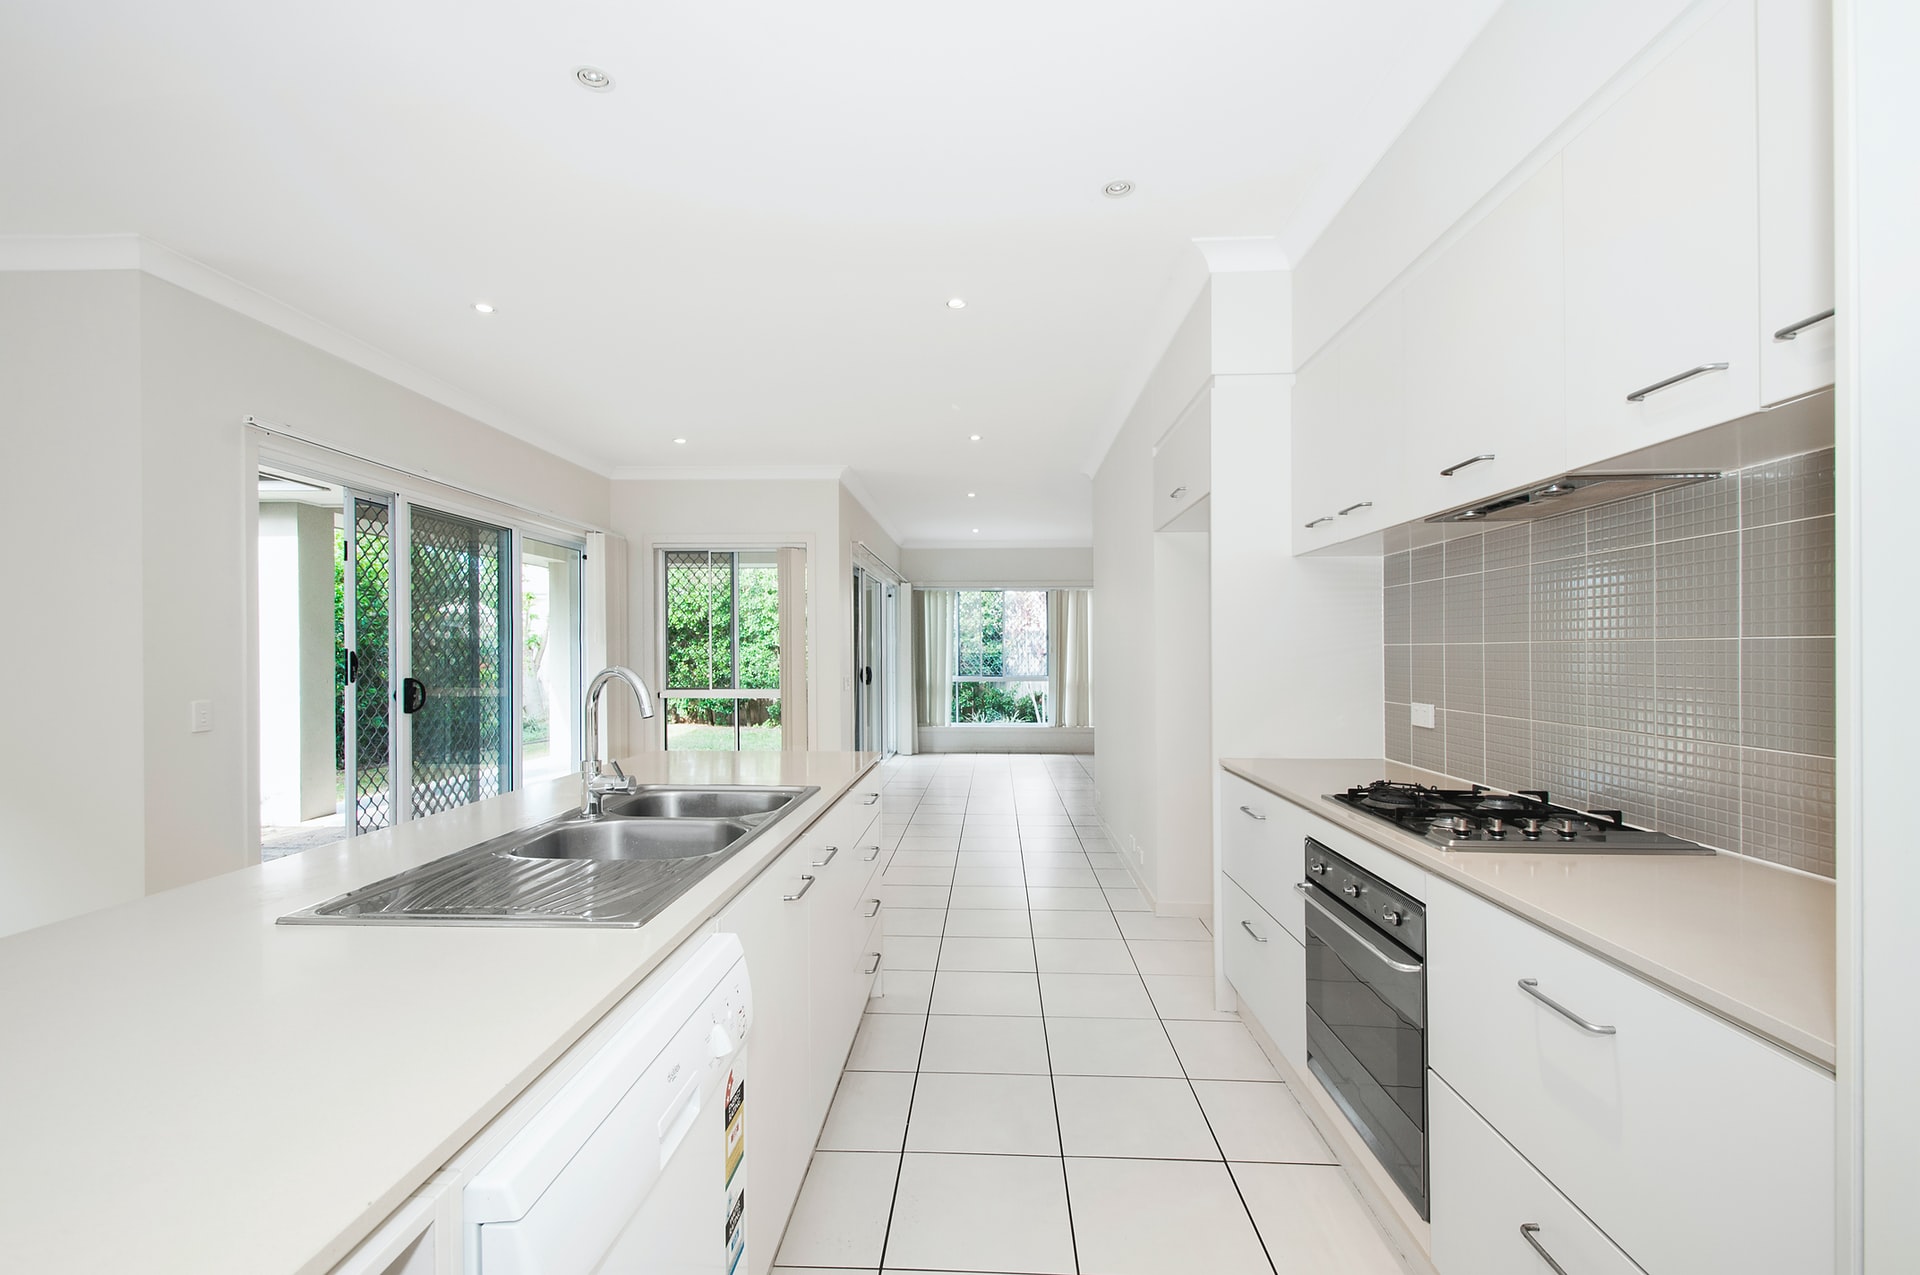 A kitchen with a white-tiled floor